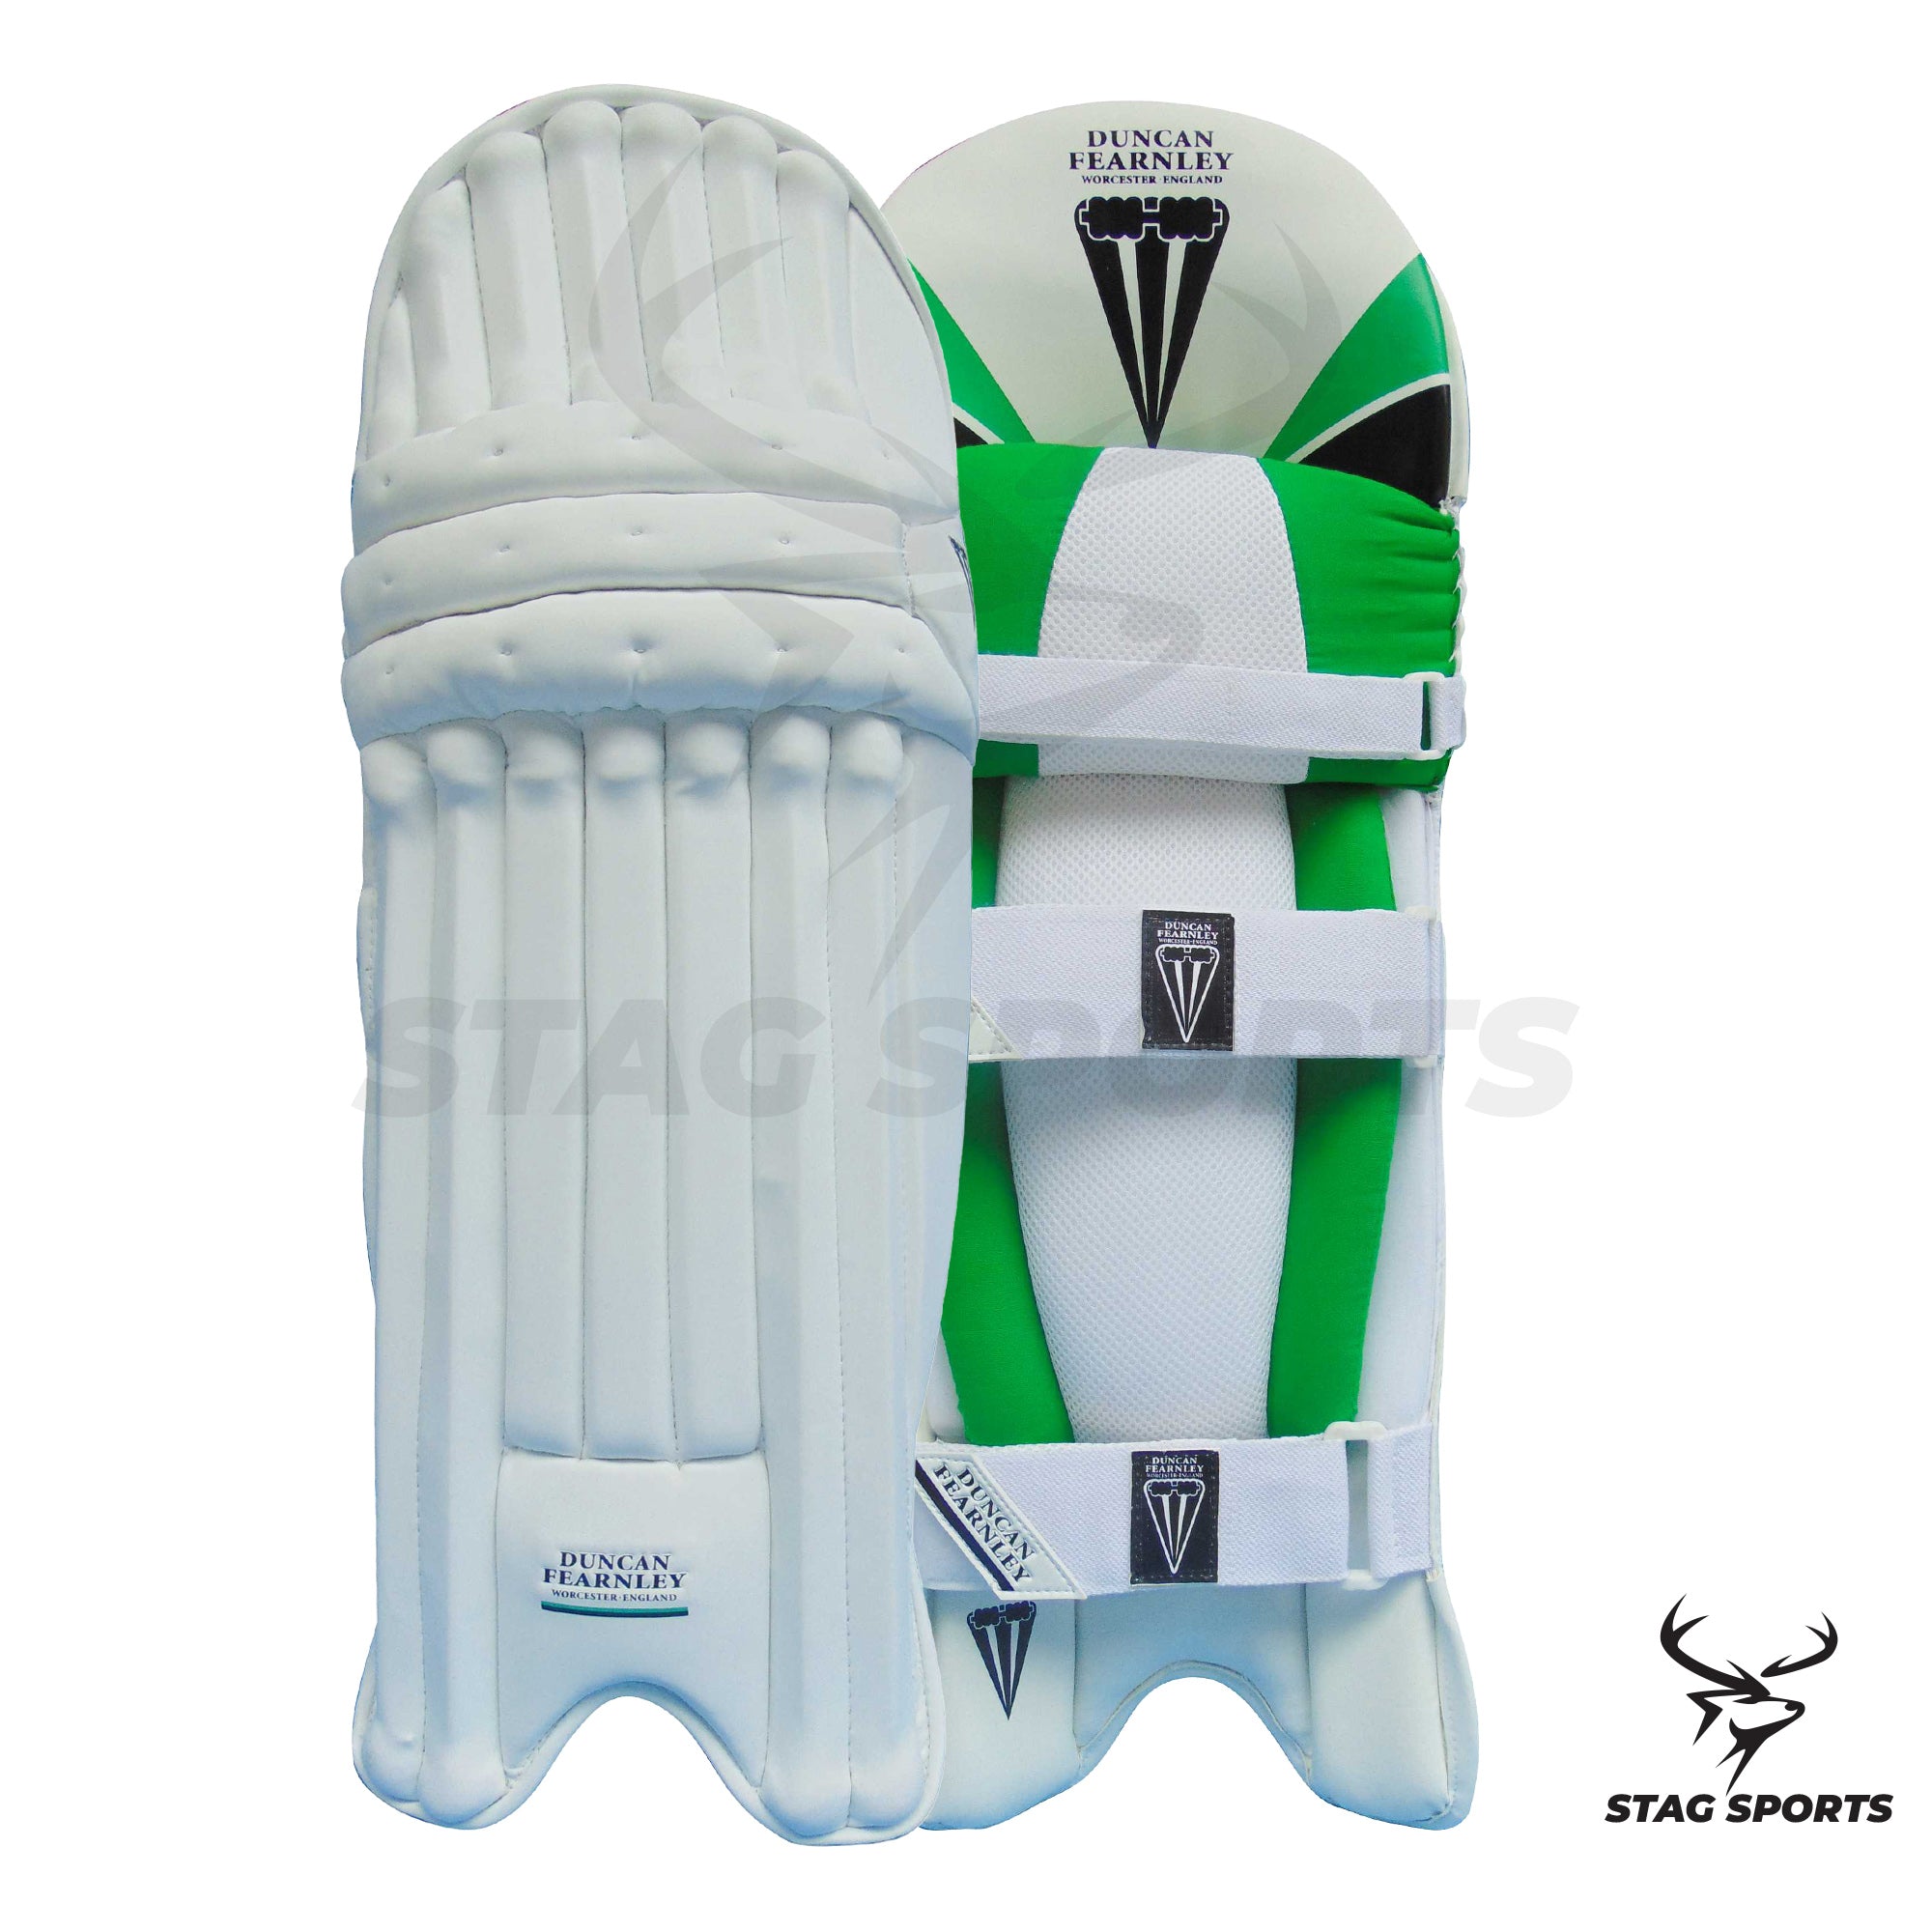 Buy Duncan Fearnley Magnum Cricket Batting Leg Guards from Stagsports